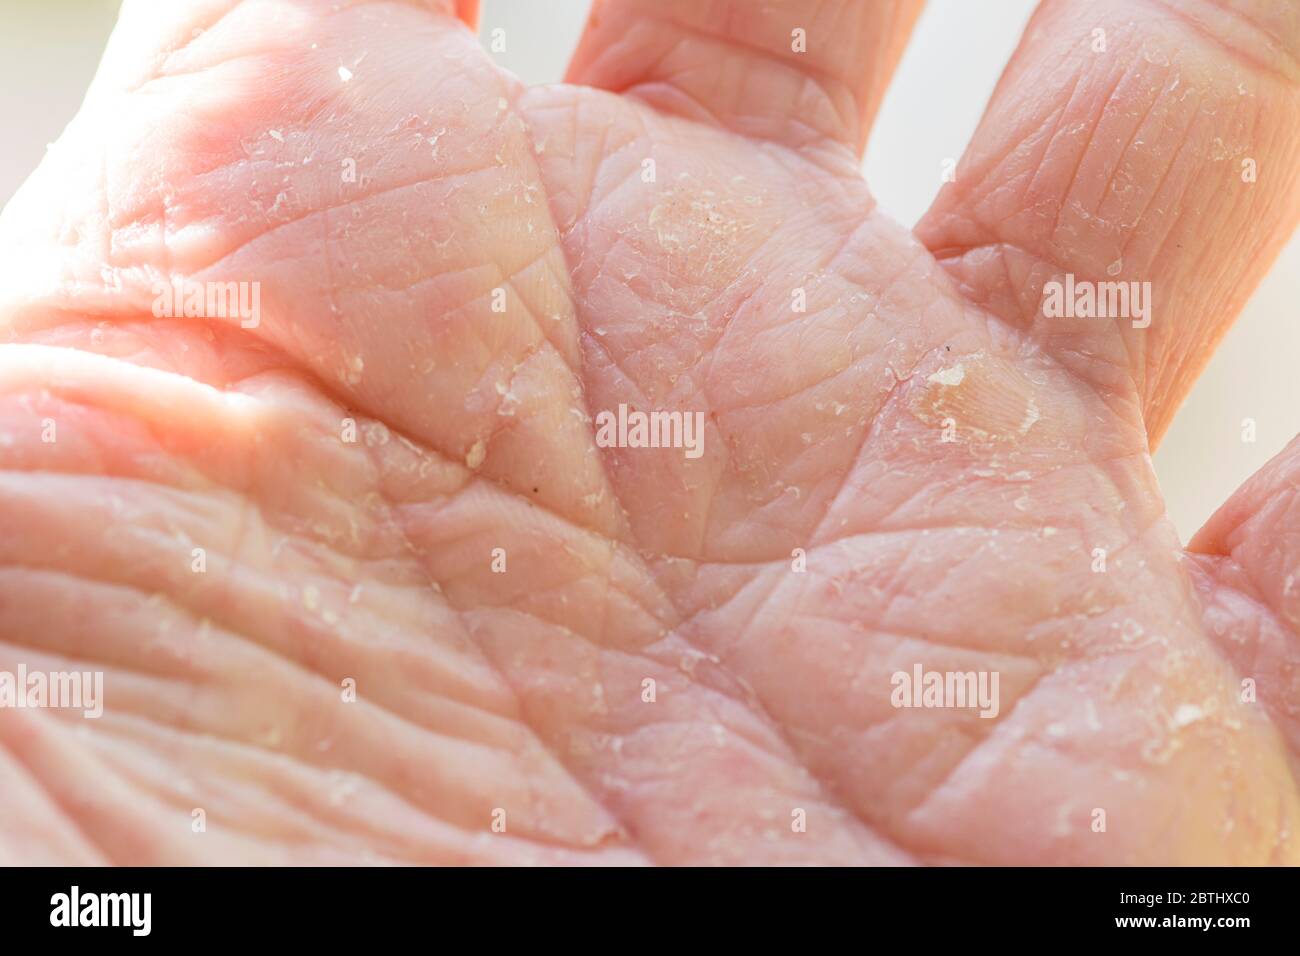 Skin eczema on the hand of a man with scaly skin Stock Photo